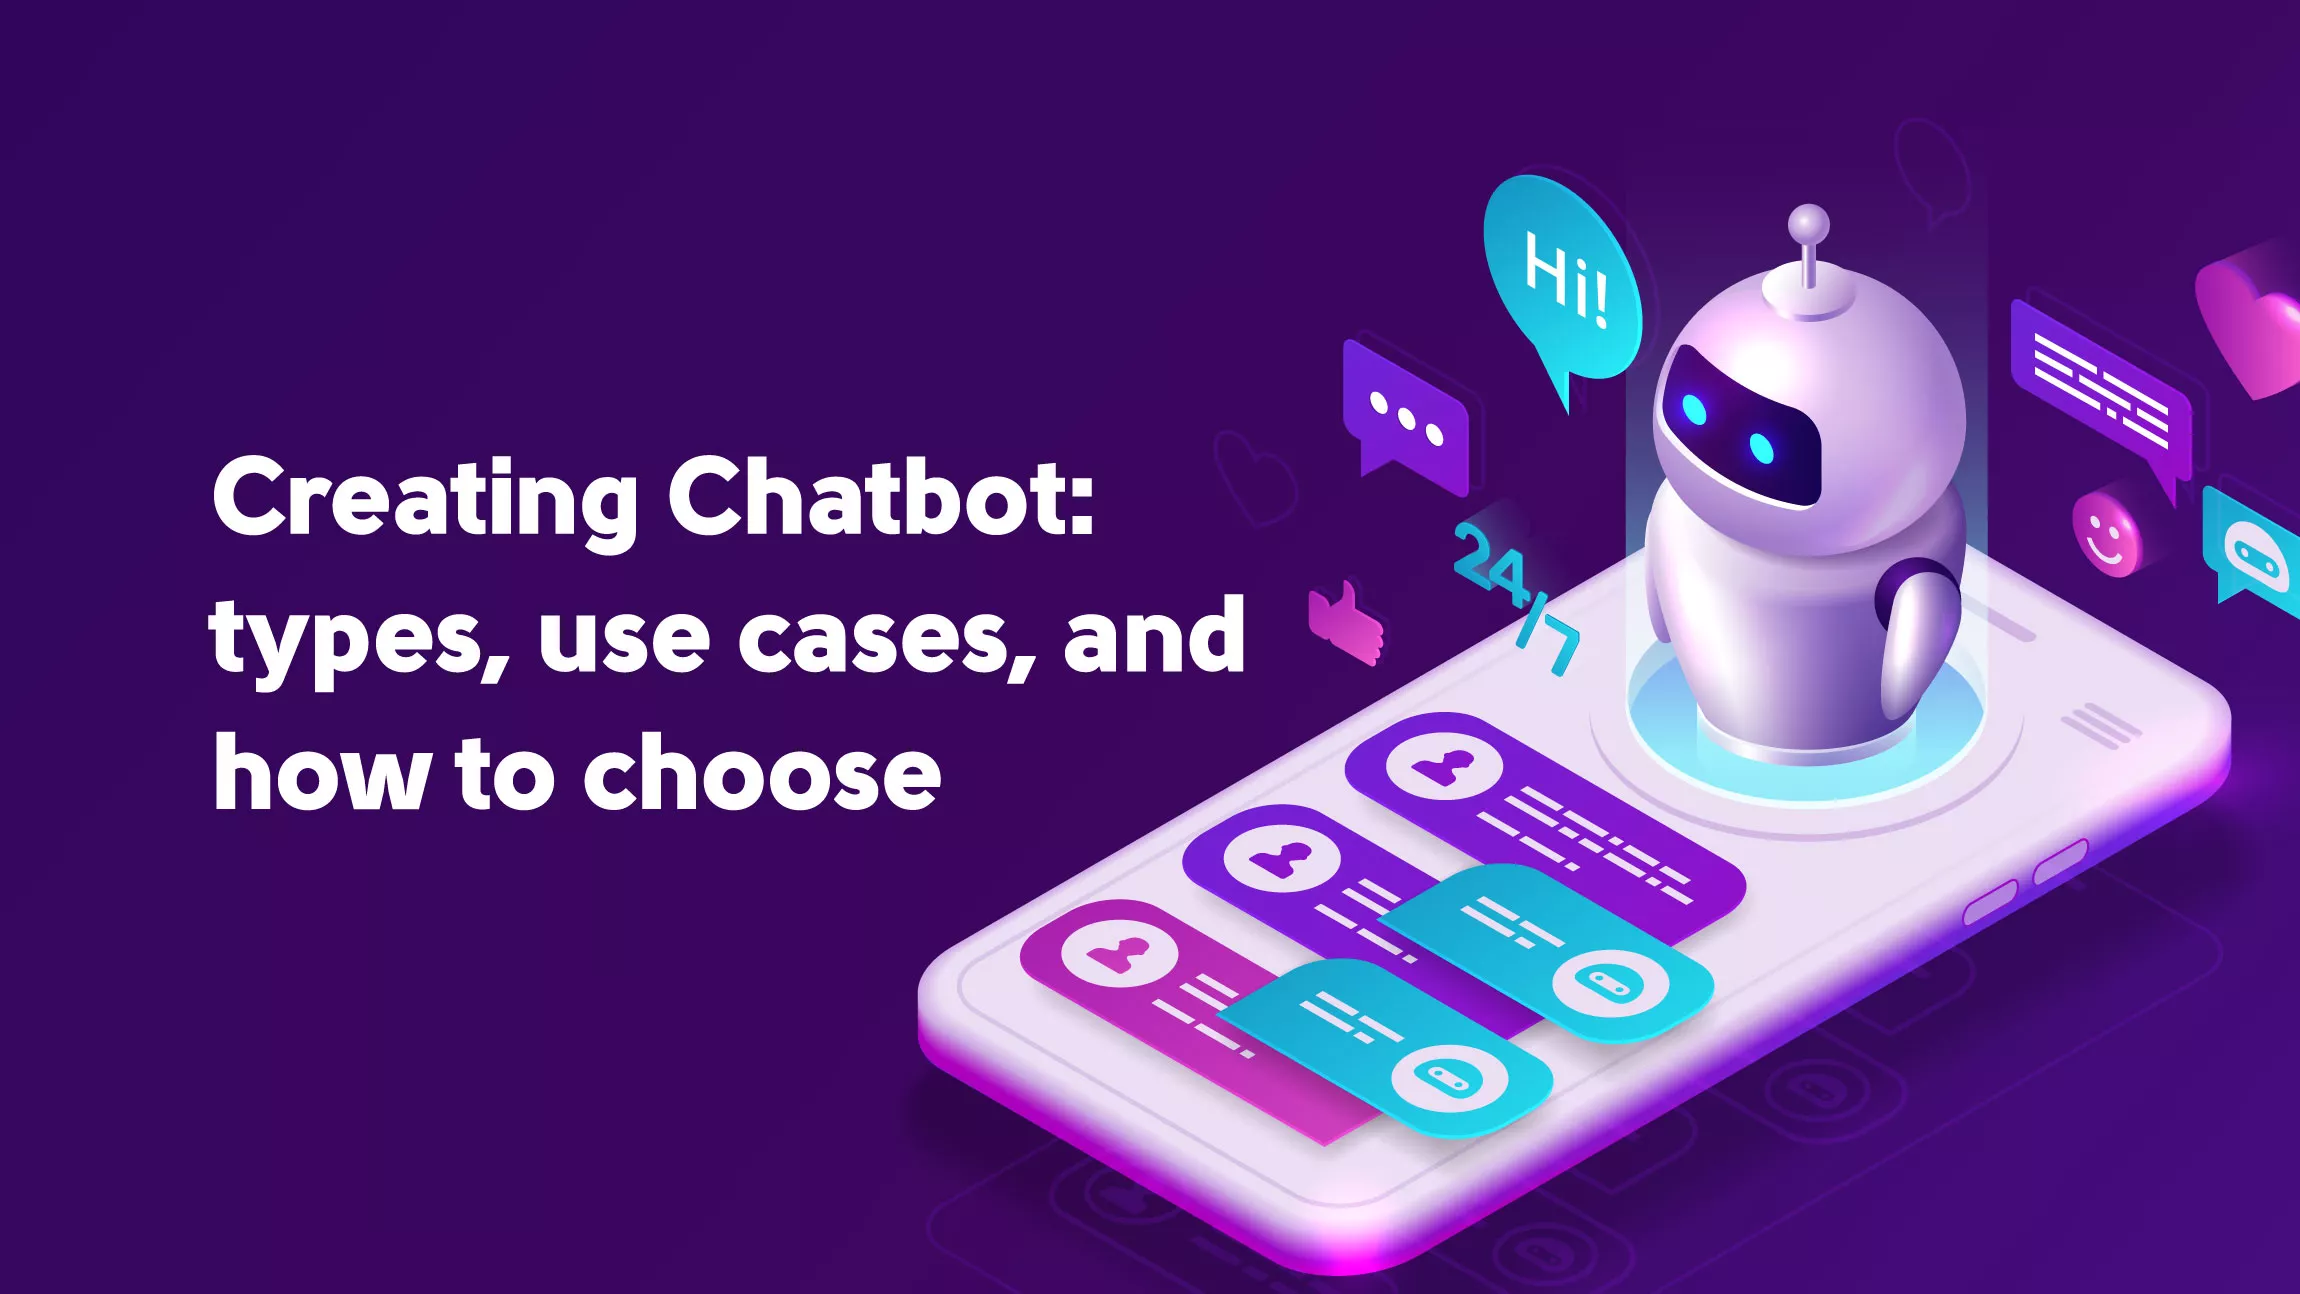 Creating a Chatbot: Types, Use Cases, and How to Choose